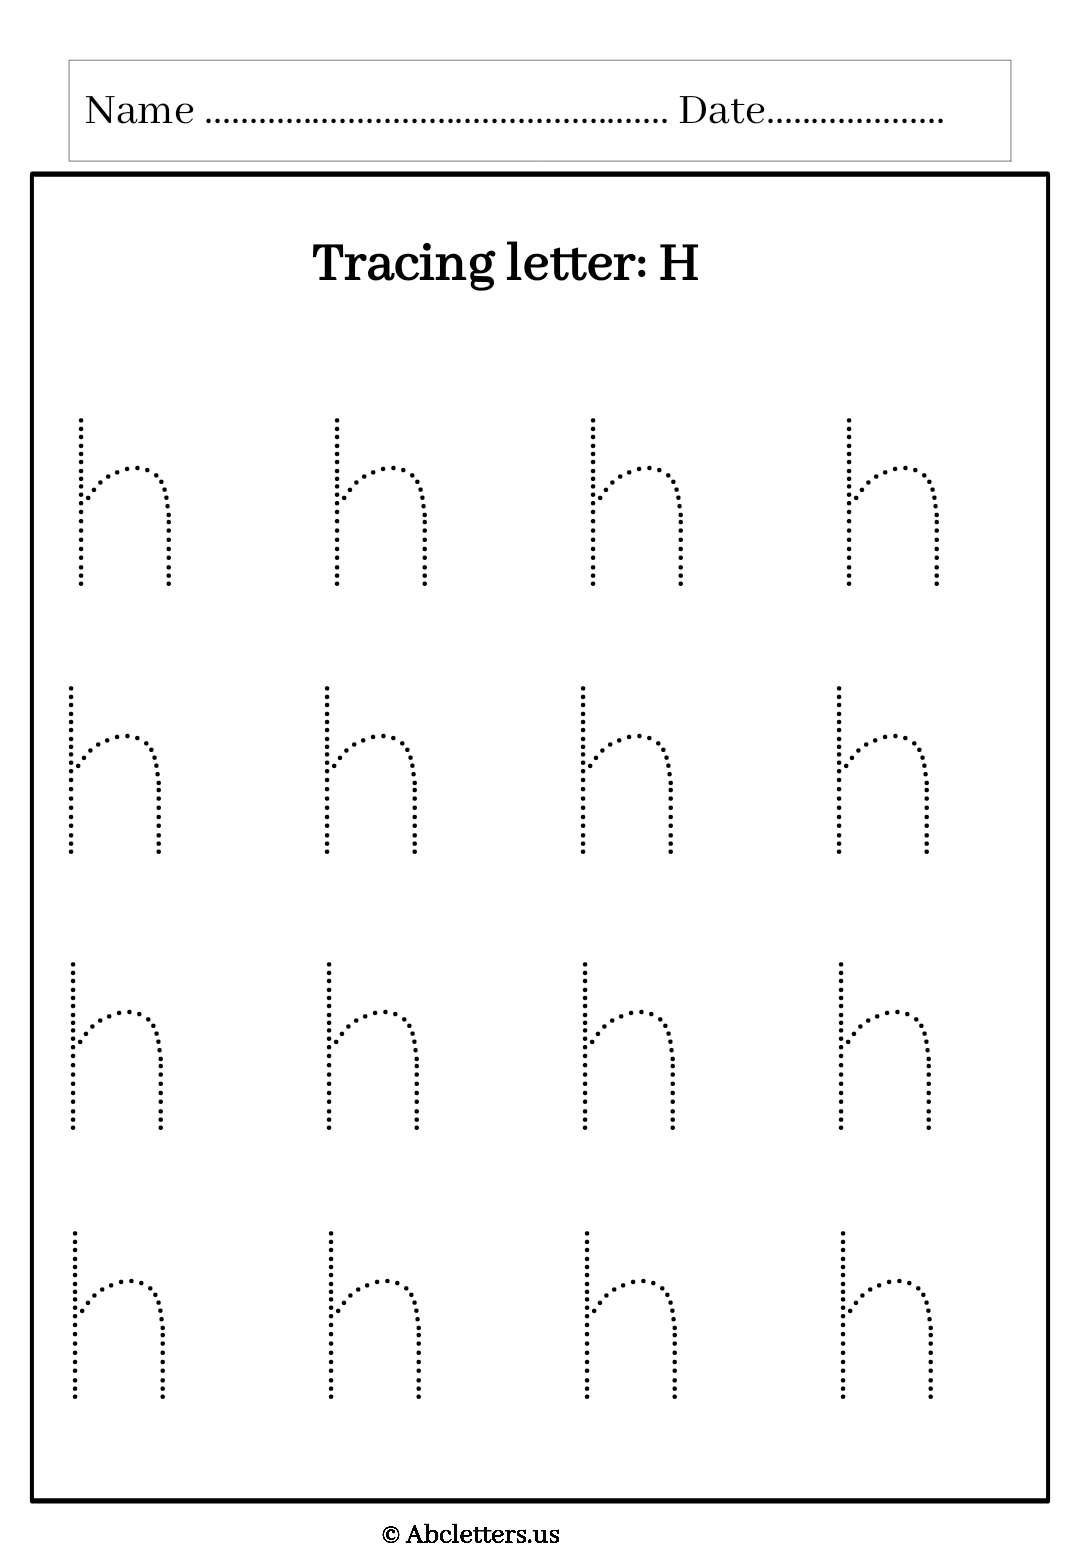 Tracing letter lowercase h